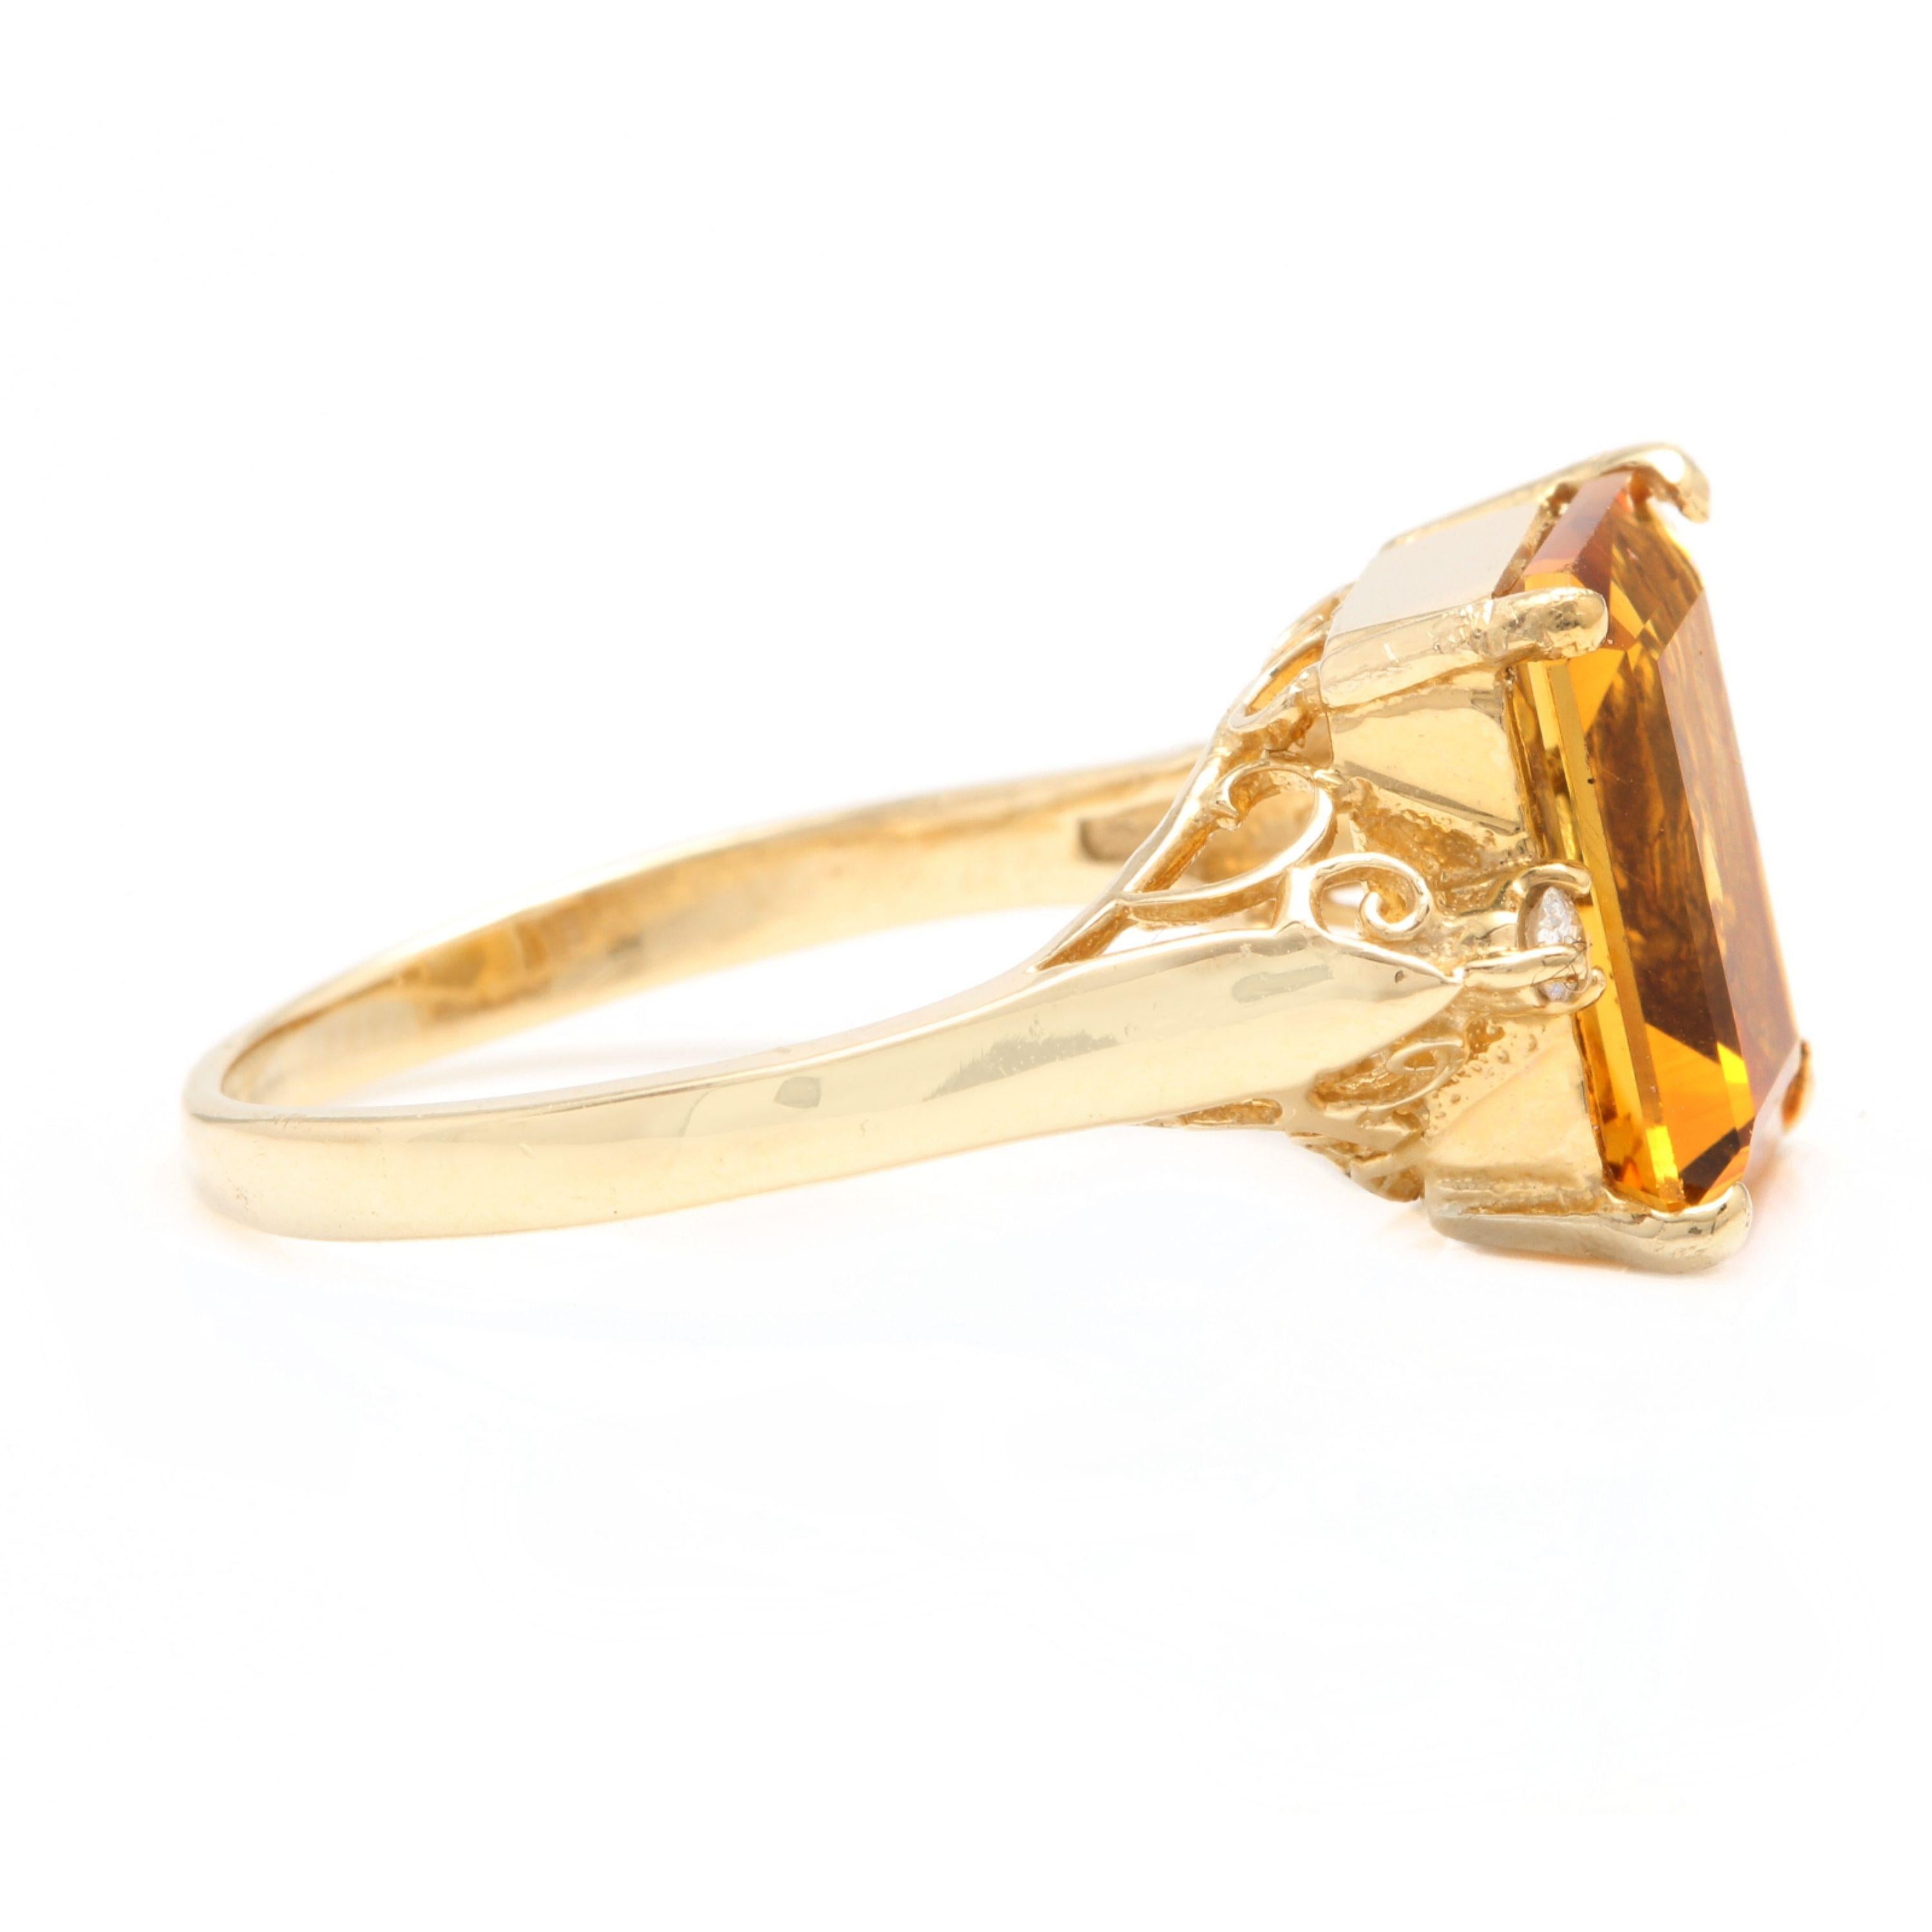 Mixed Cut 4.08 Carat Natural Citrine and Diamond 14 Karat Solid Yellow Gold Ring For Sale